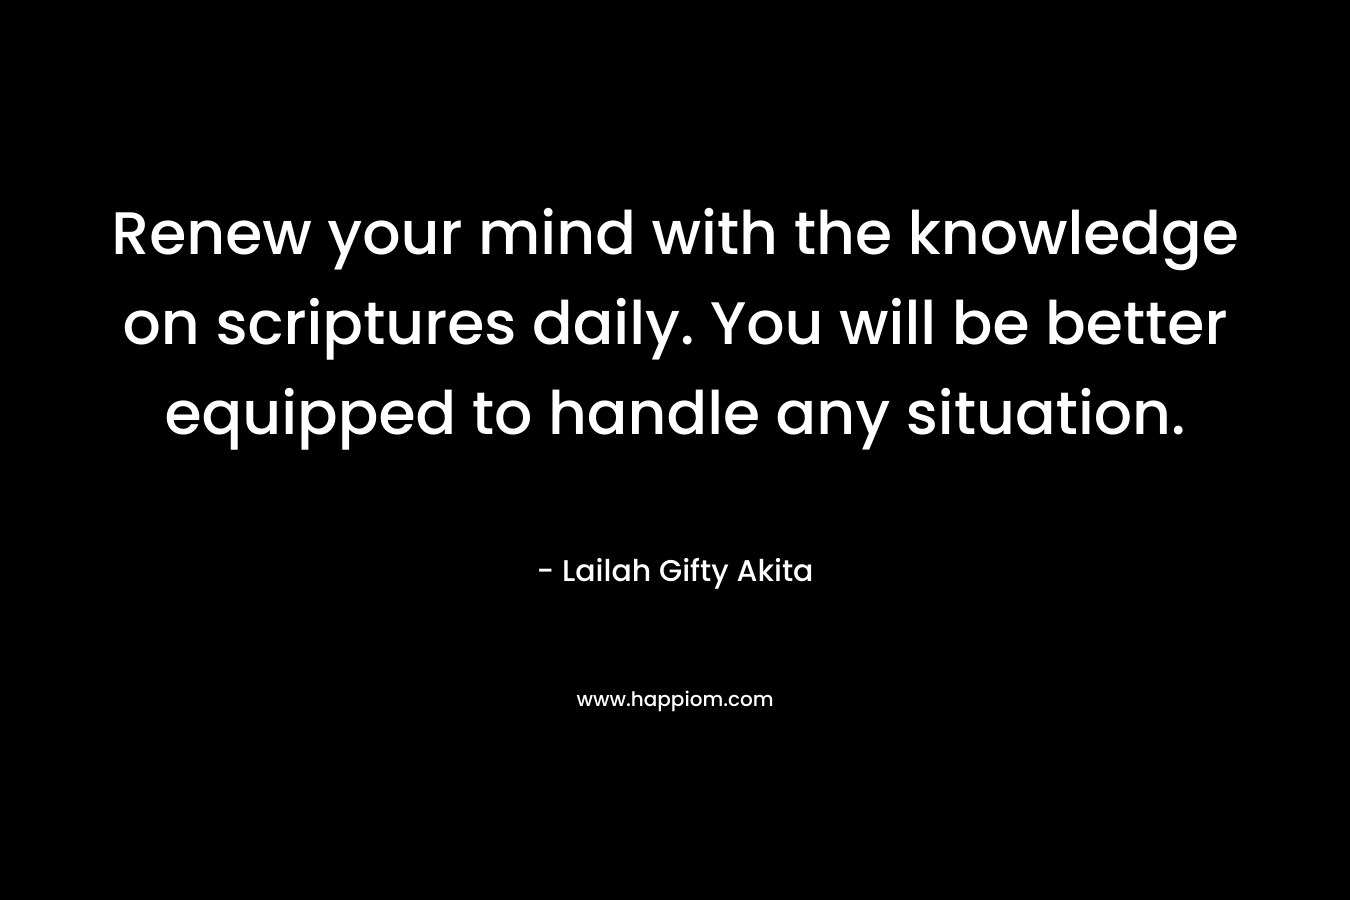 Renew your mind with the knowledge on scriptures daily. You will be better equipped to handle any situation. – Lailah Gifty Akita